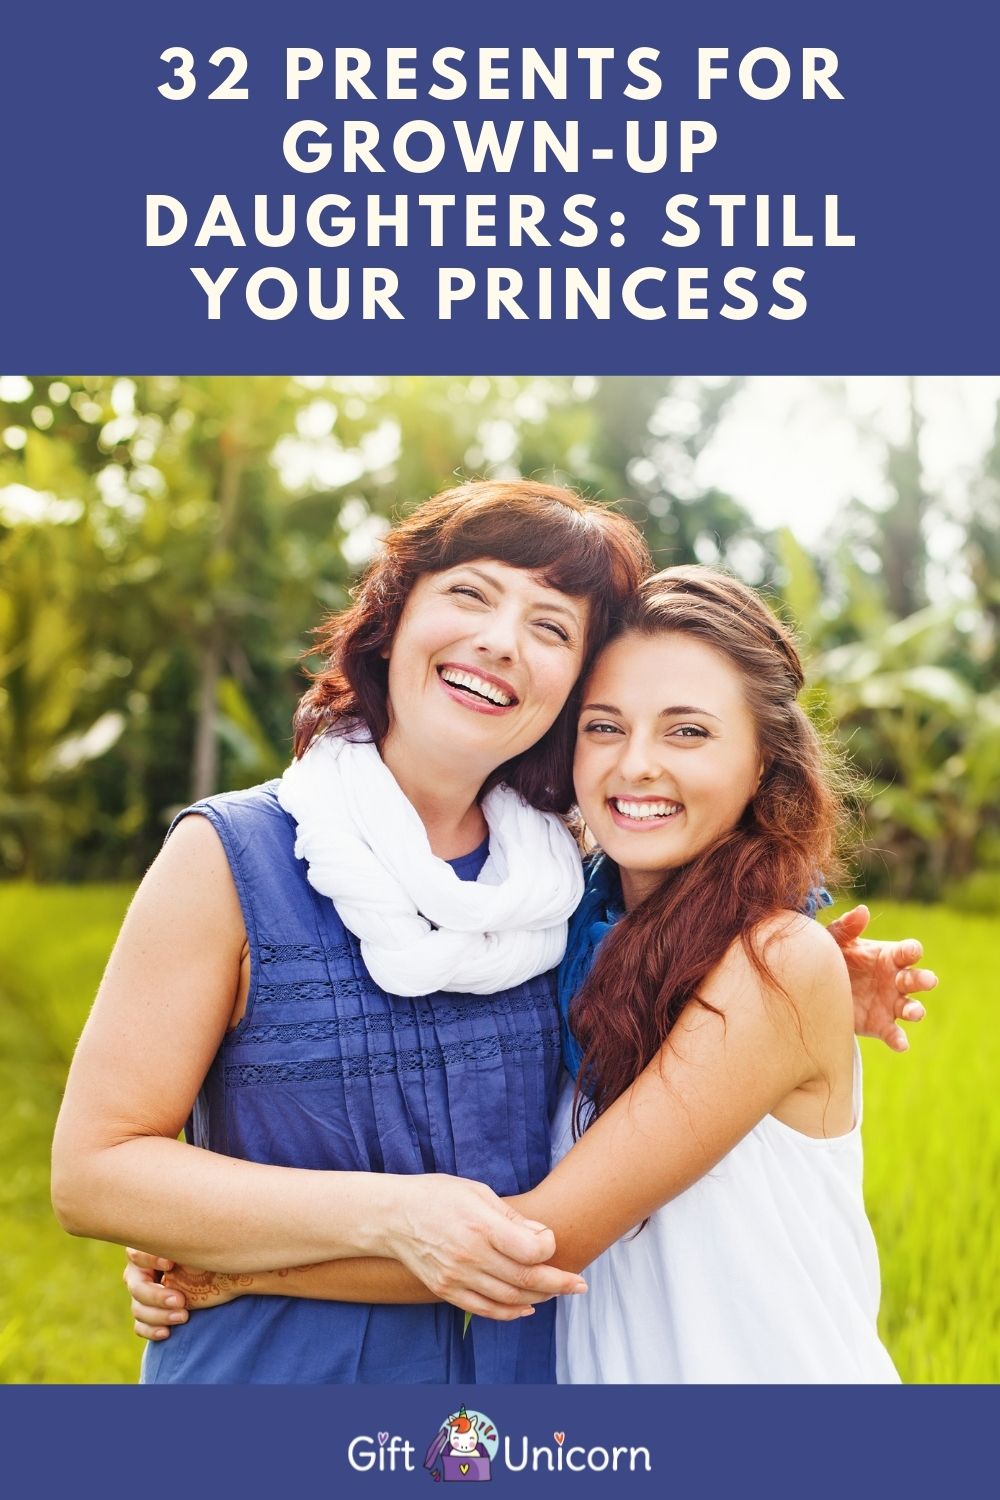 32 Presents for Grown-Up Daughters: Still Your Princess - pinterest pin image